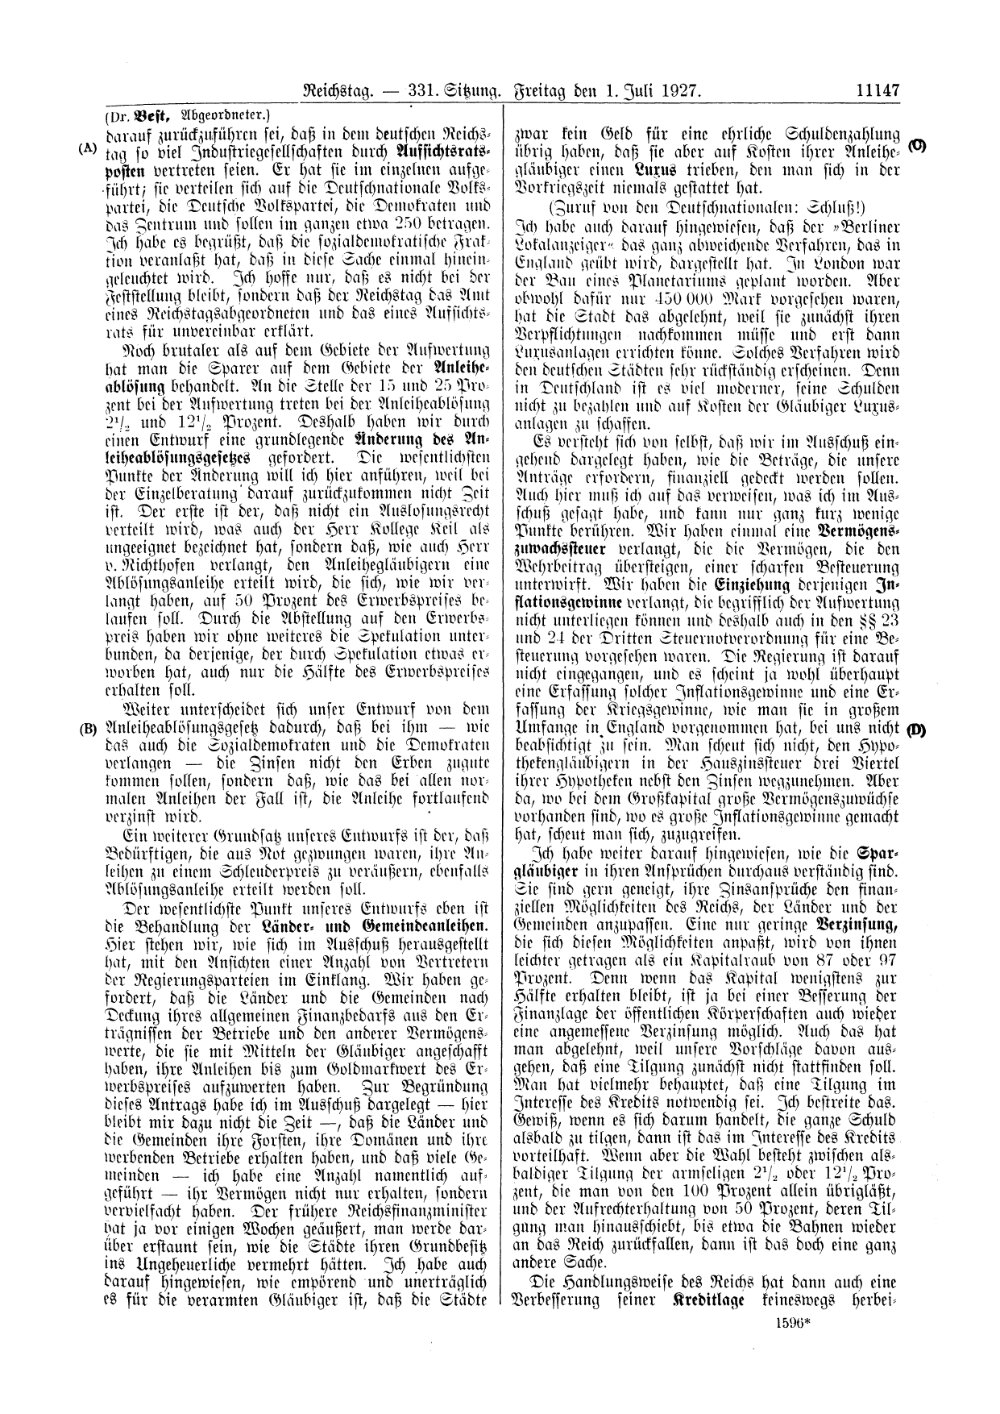 Scan of page 11147